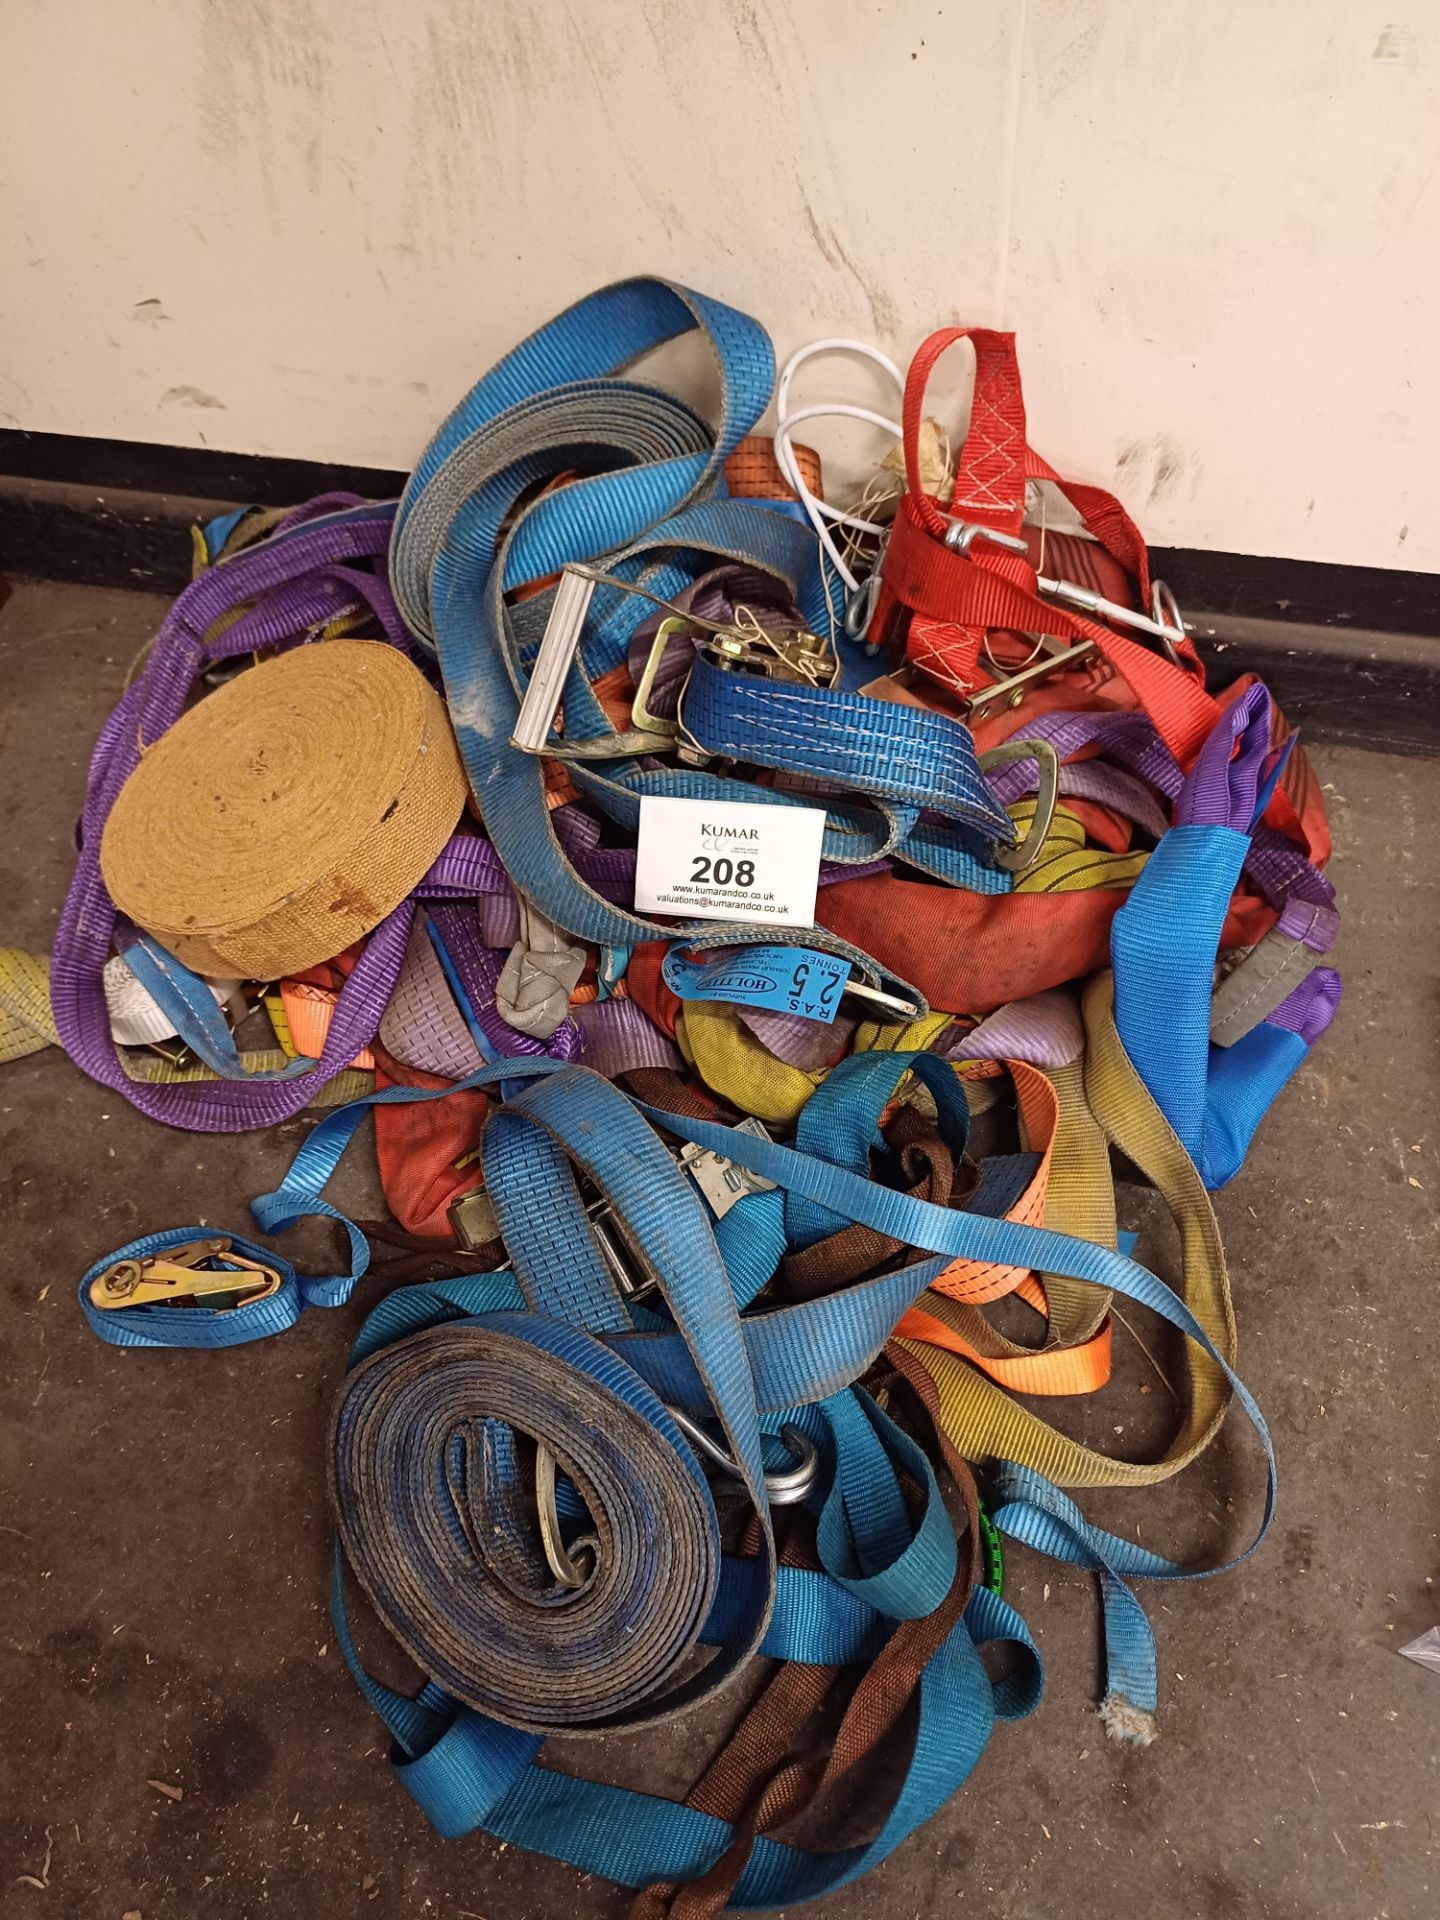 Assortment of Racket Straps - Image 4 of 4